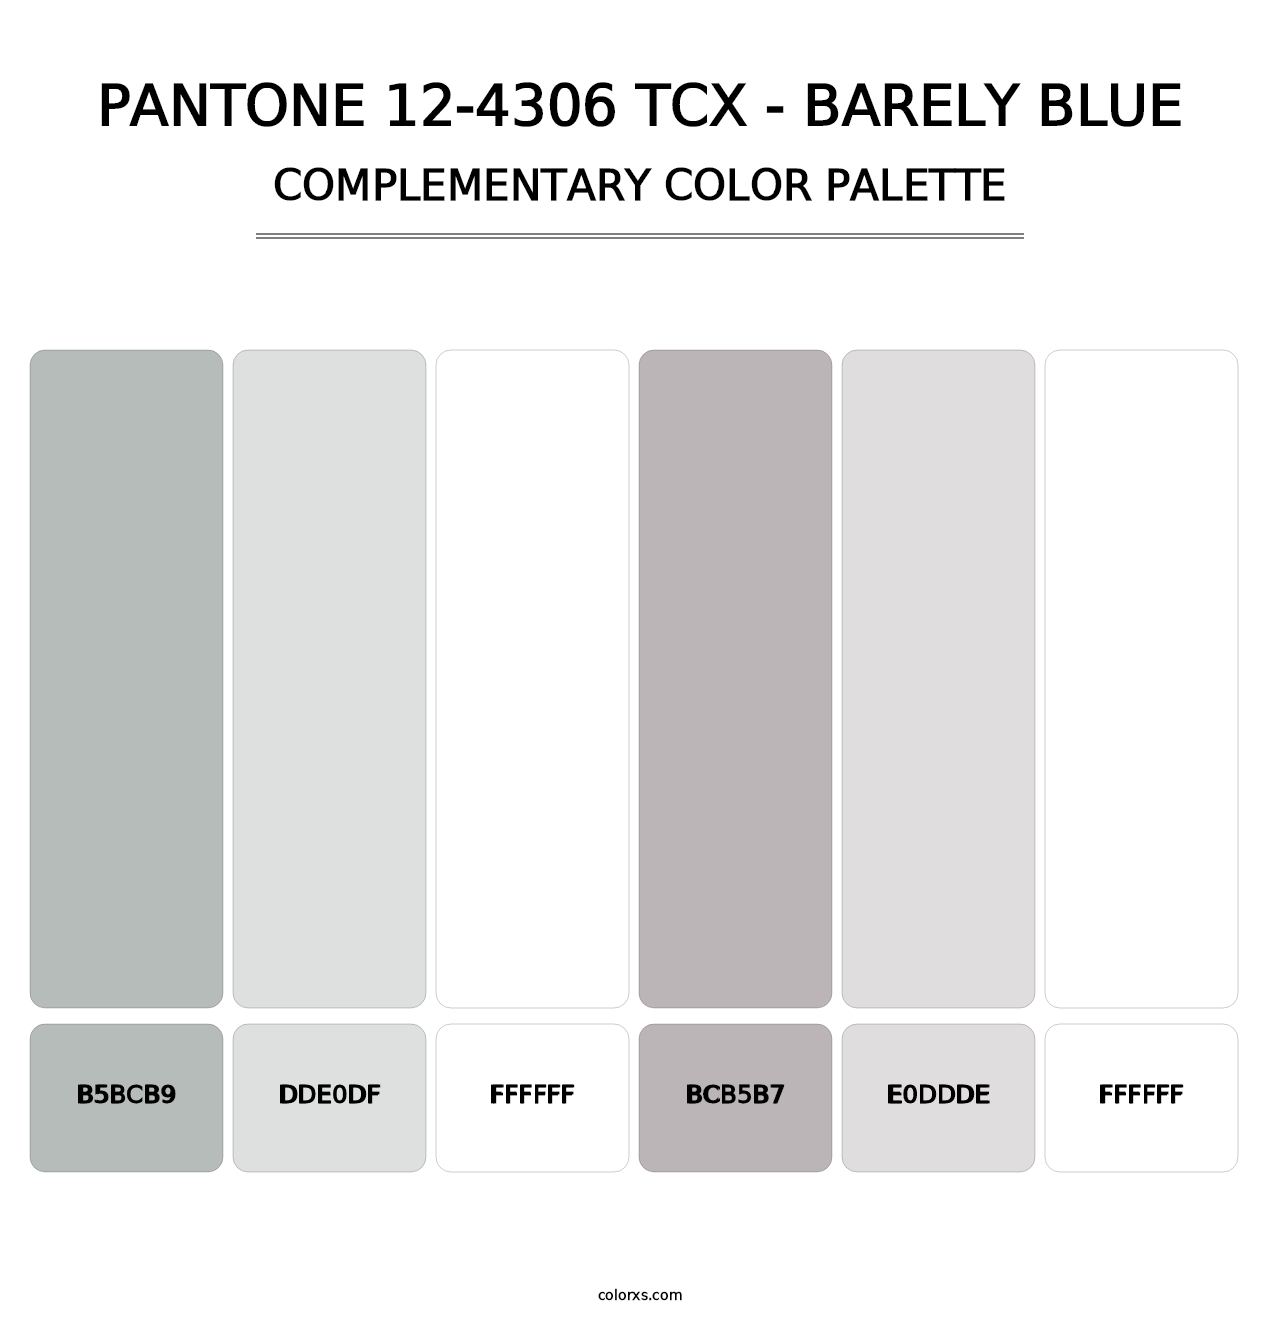 PANTONE 12-4306 TCX - Barely Blue - Complementary Color Palette